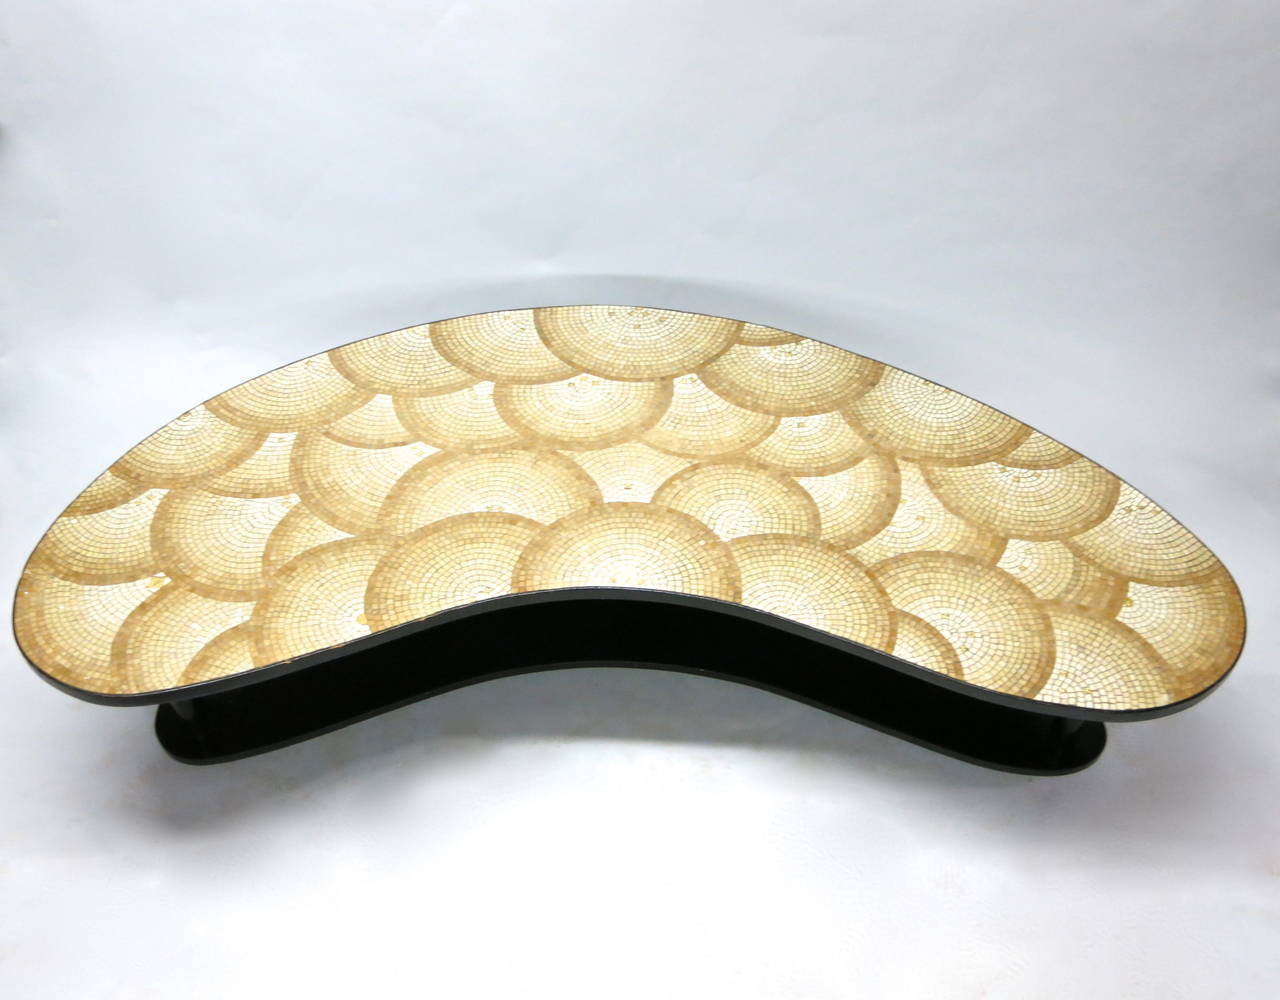 Bi-level boomerang shaped coffee table with three round tapered wood legs supporting a mosaic top with a design pattern of overlapping circles. The lower tier is in the same shape as the top and is made of lacquered wood and also supported by the